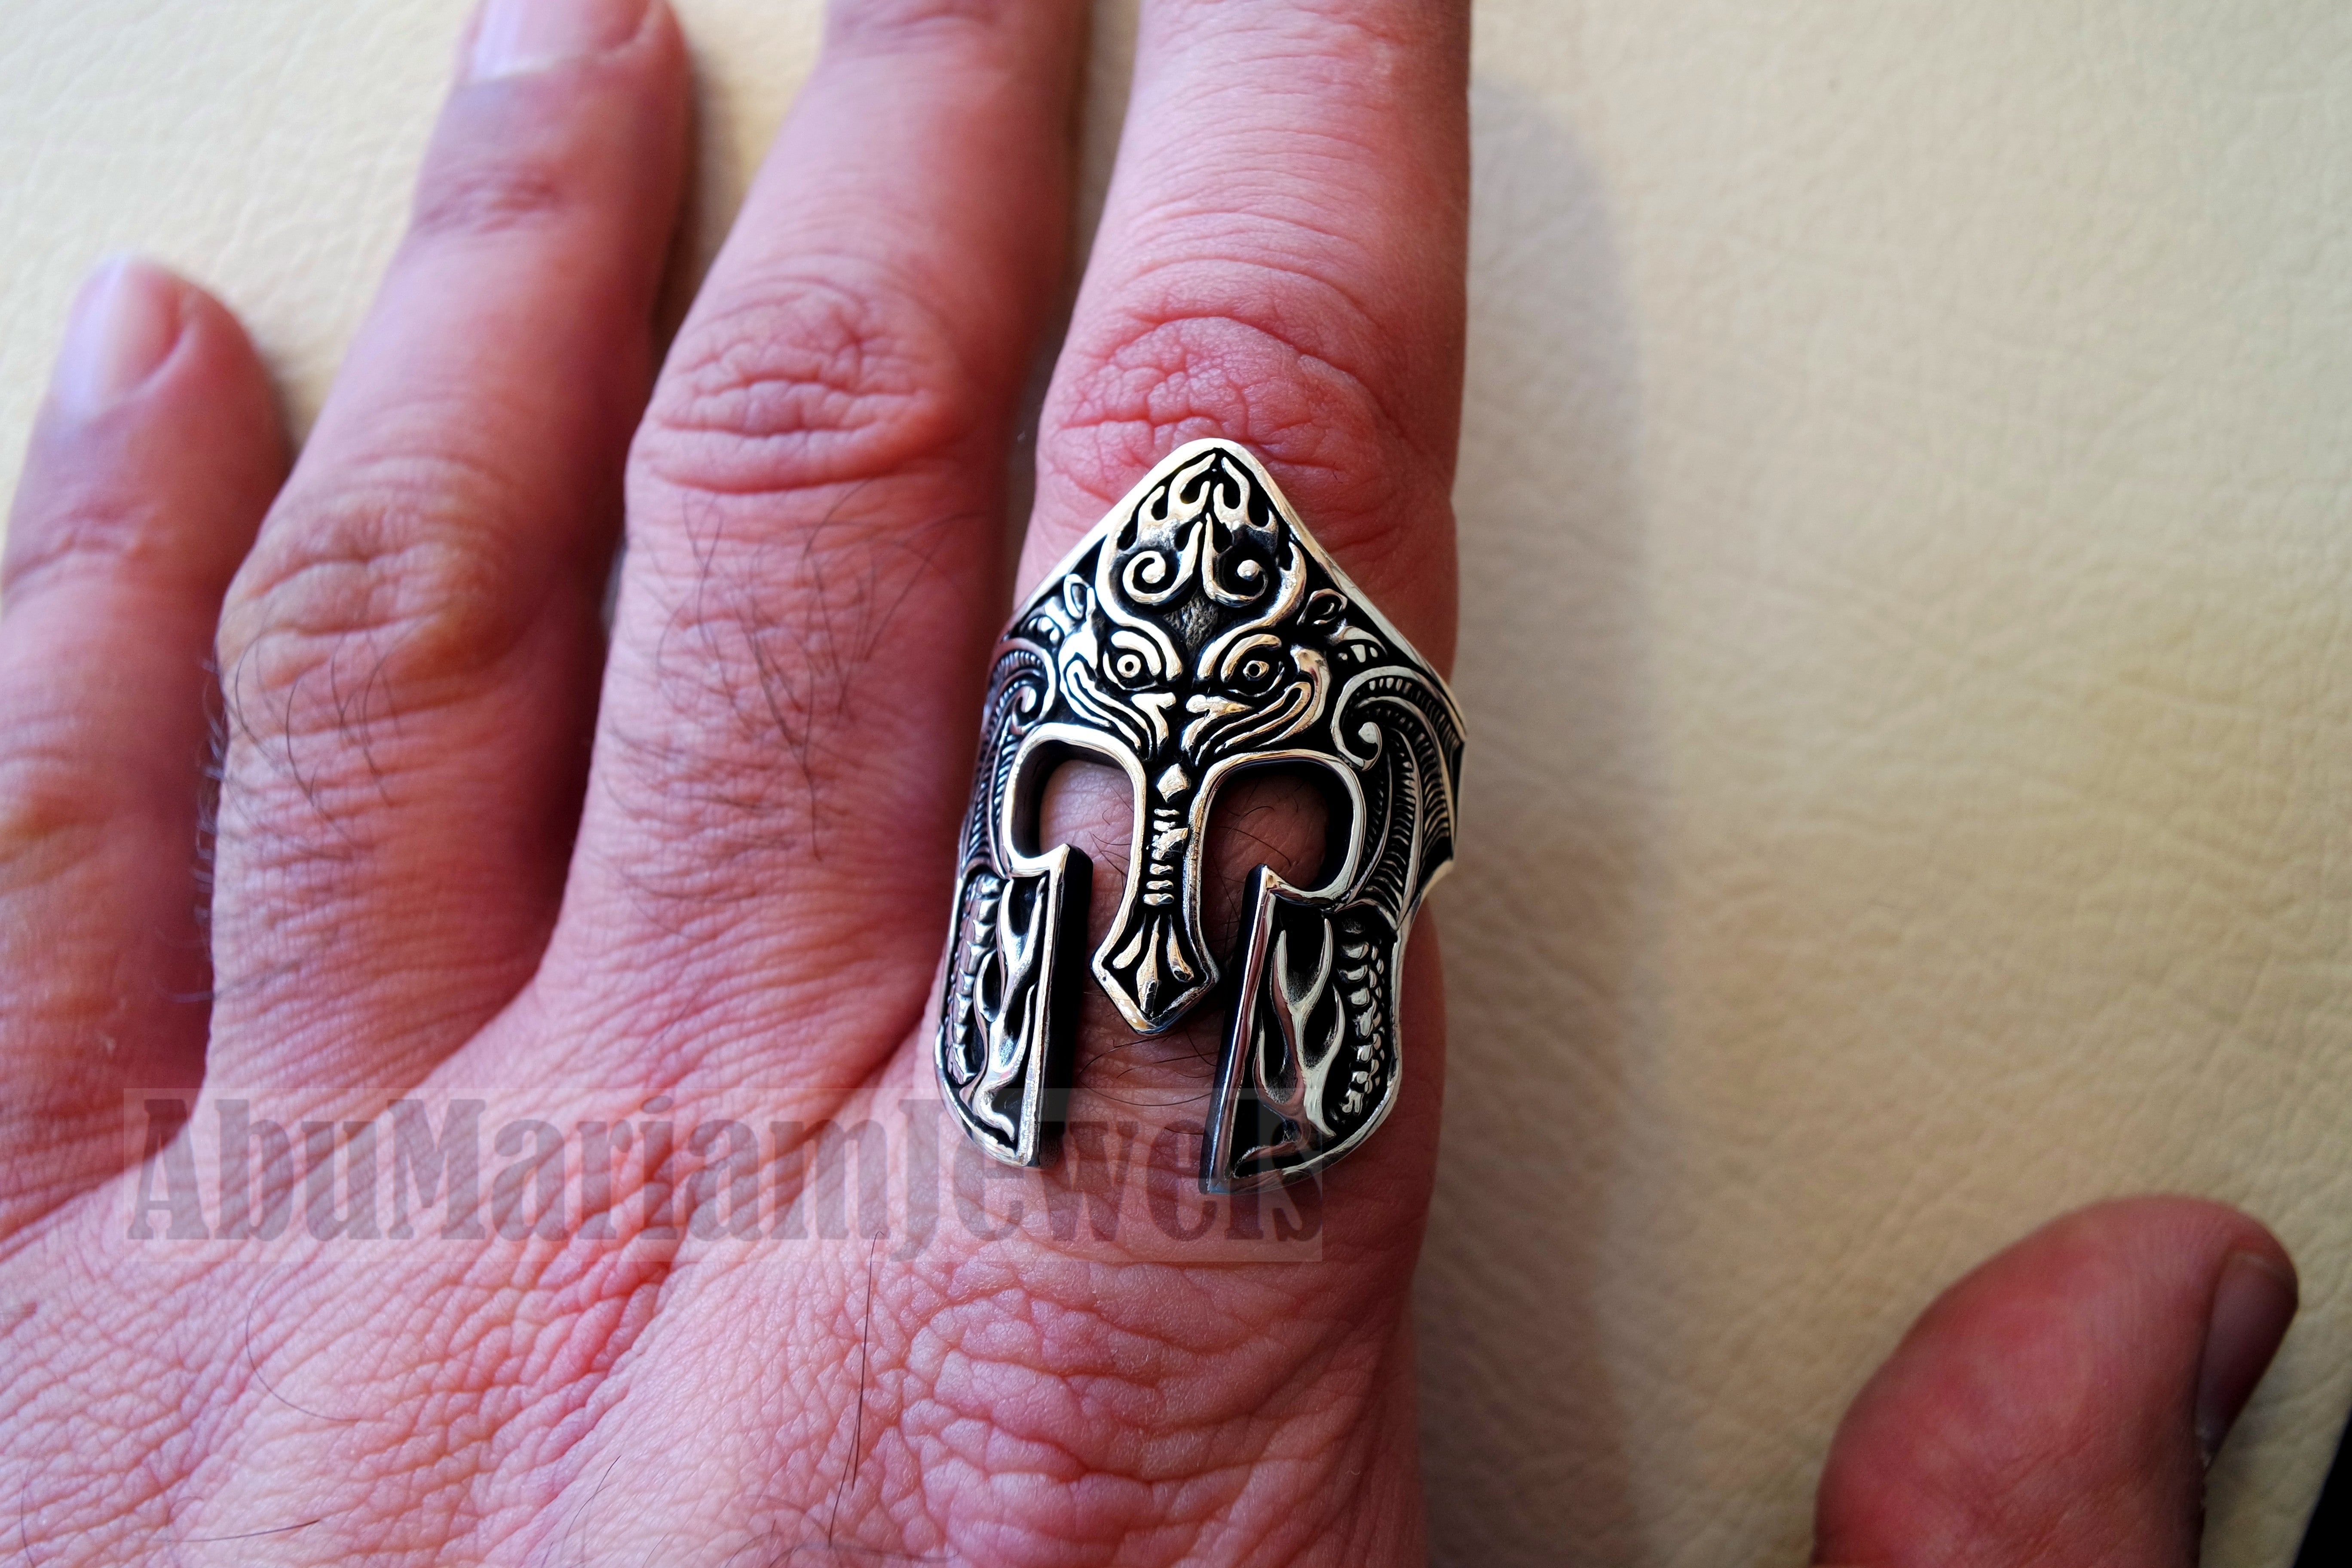 Warrior ring face mask ring sterling silver 925 huge man jewelry piece all sizes fast express shipping